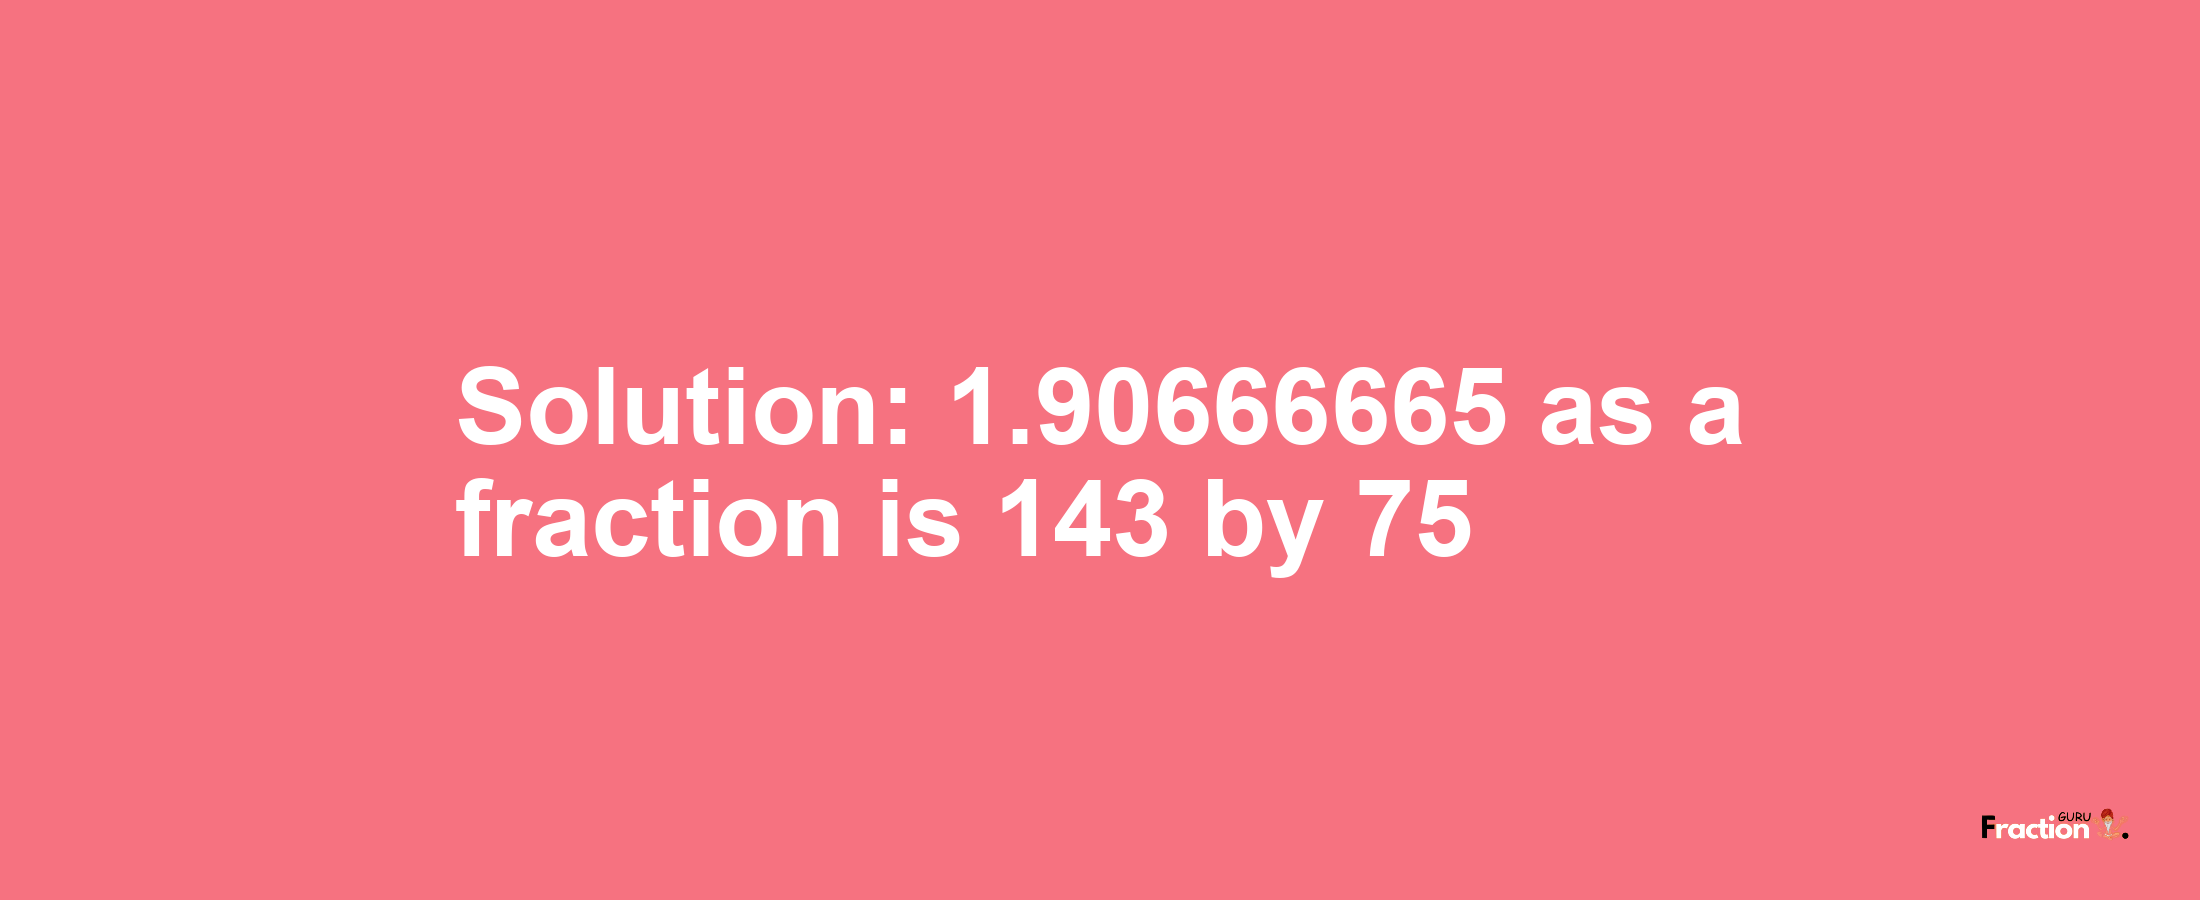 Solution:1.90666665 as a fraction is 143/75